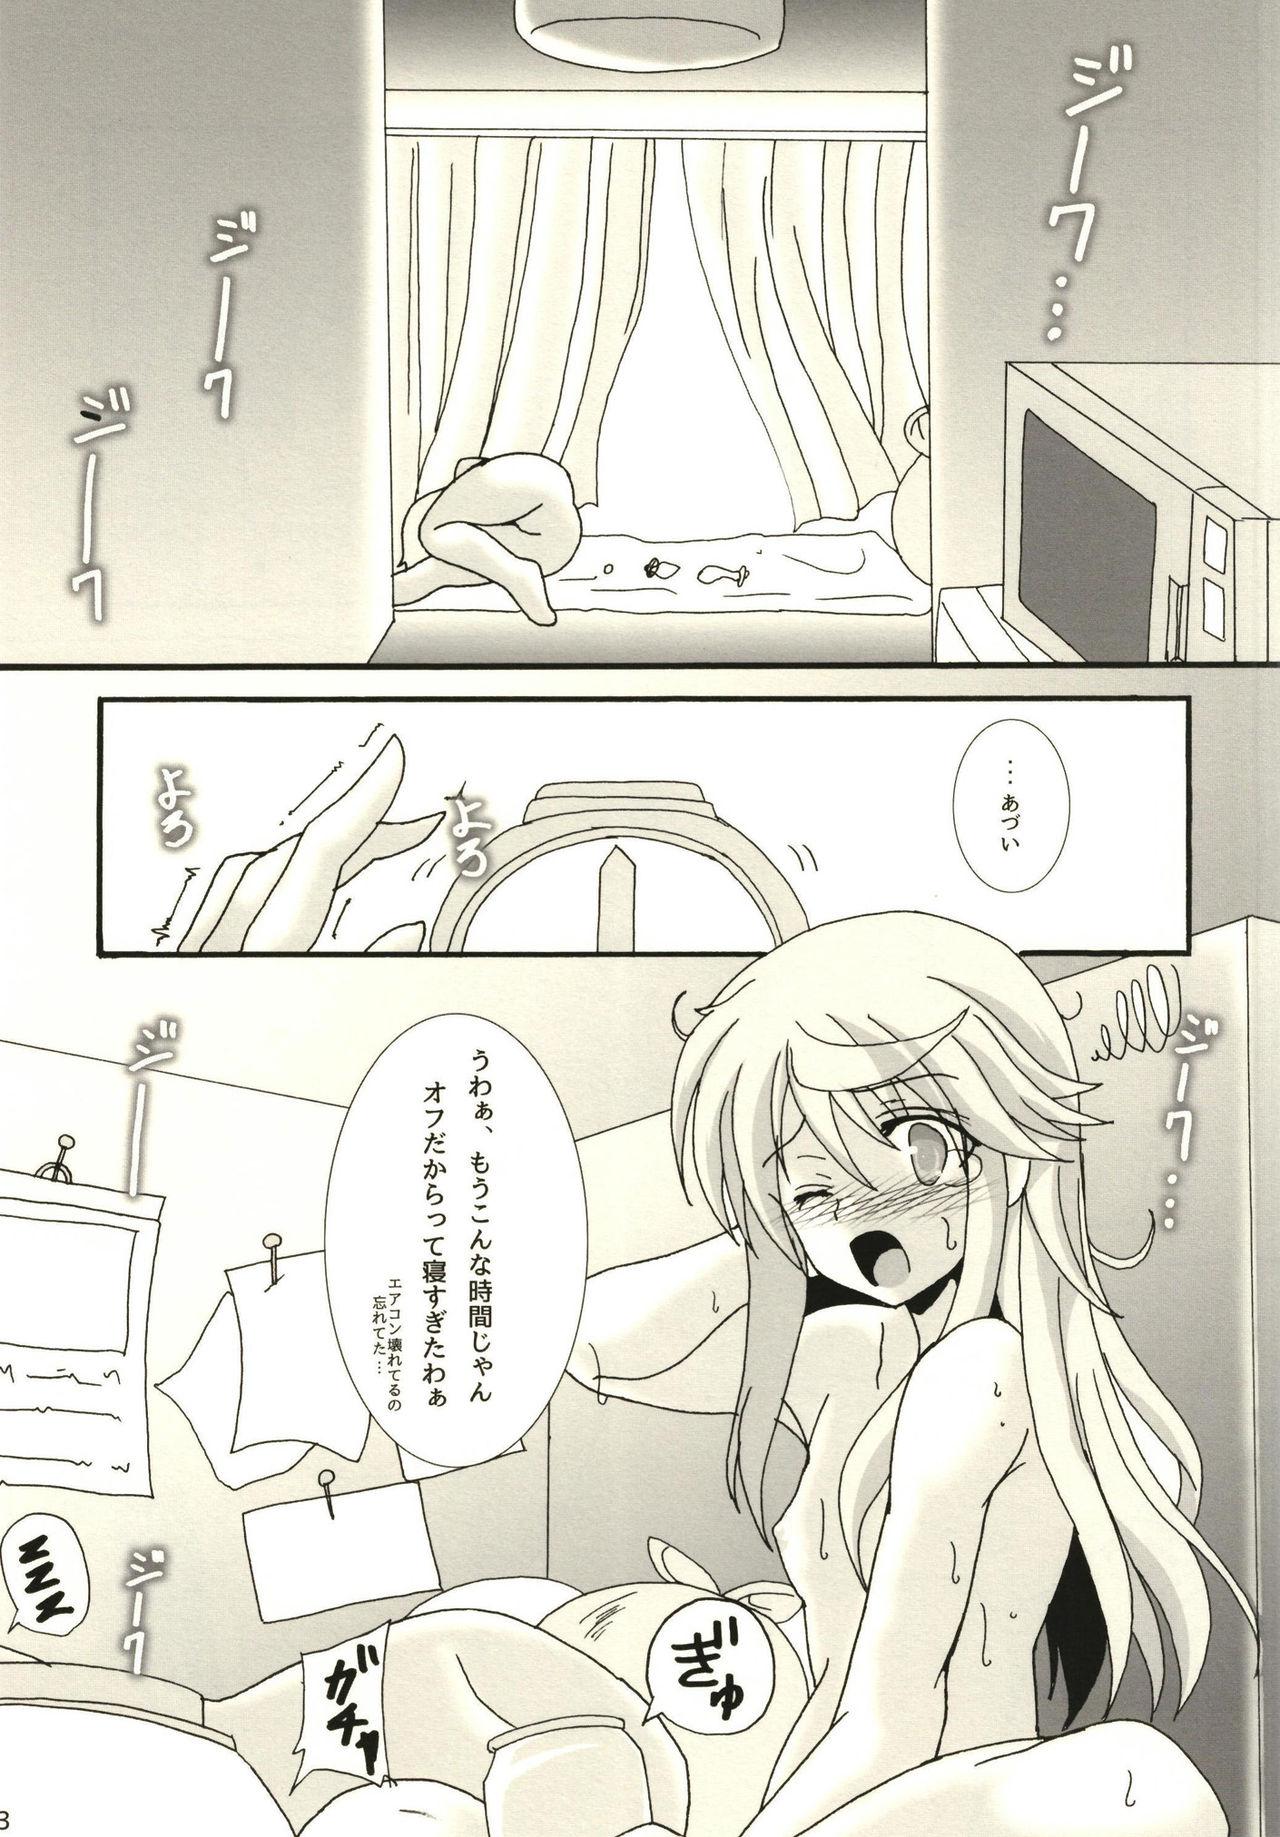 Amazing Mari-chan to Ouchi Date - Alice gear aegis Blow Jobs - Page 5